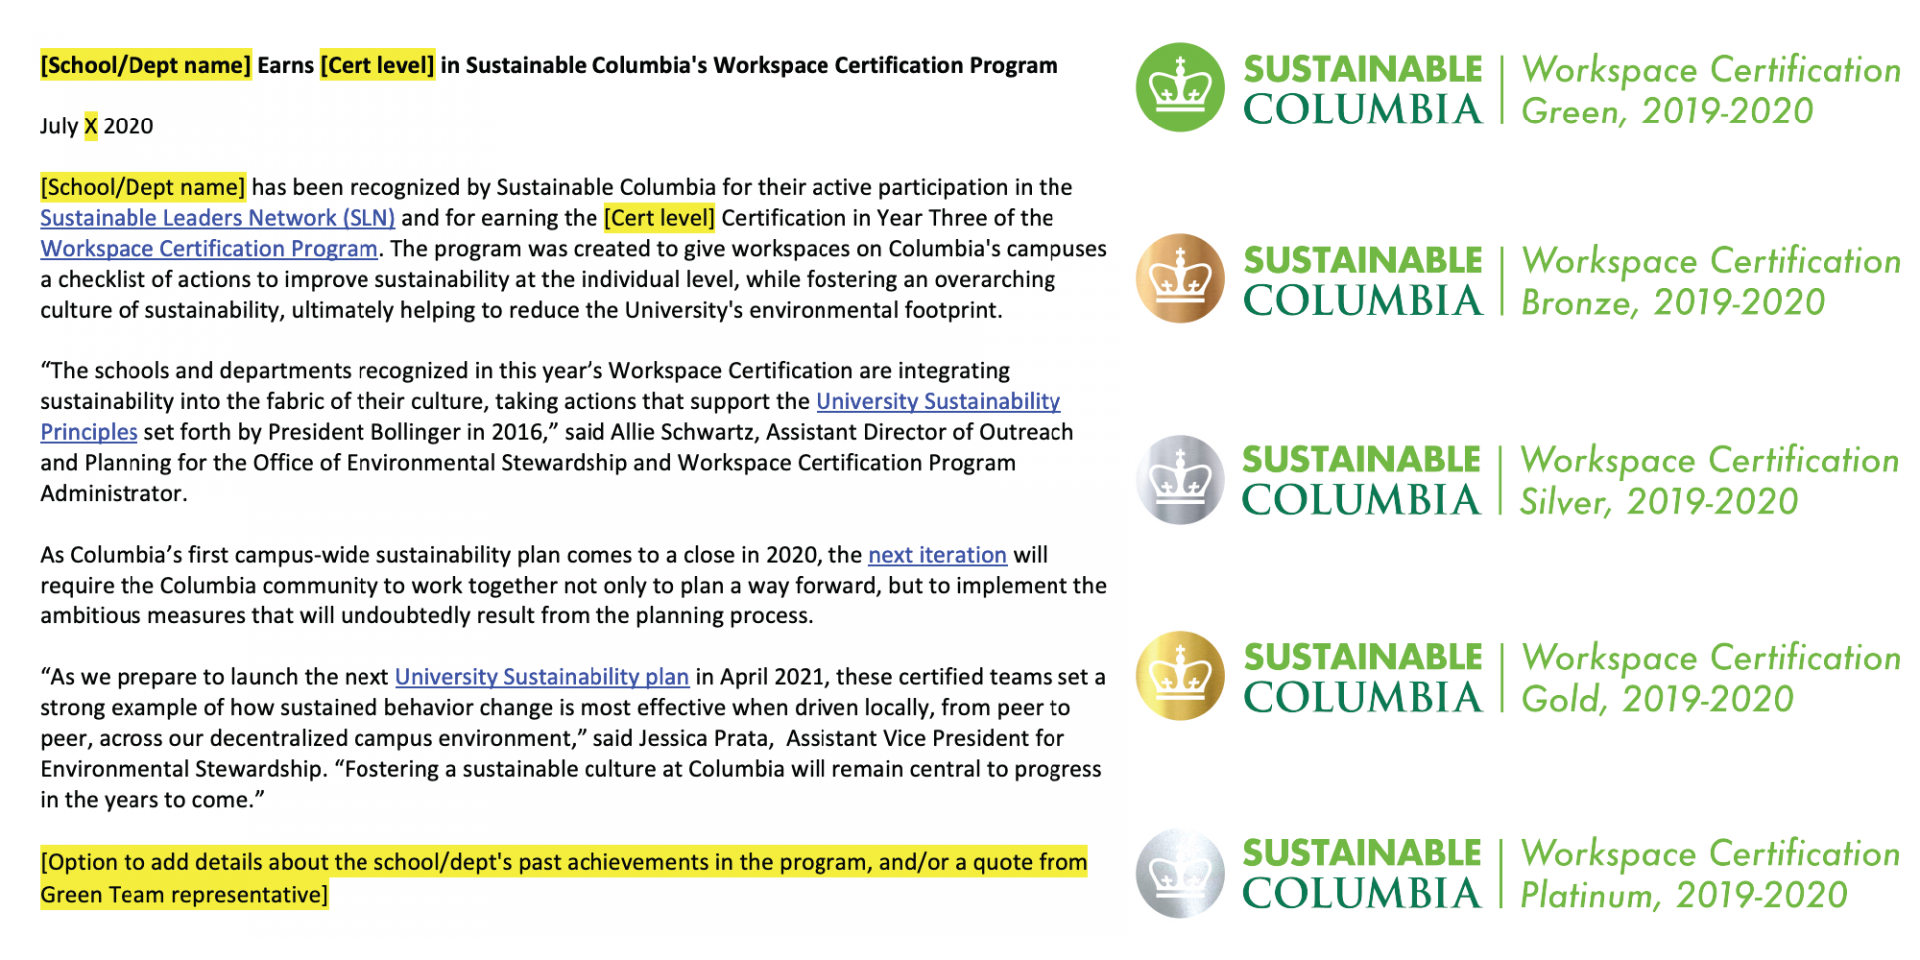 Press Release Template and Badges for each level of certification